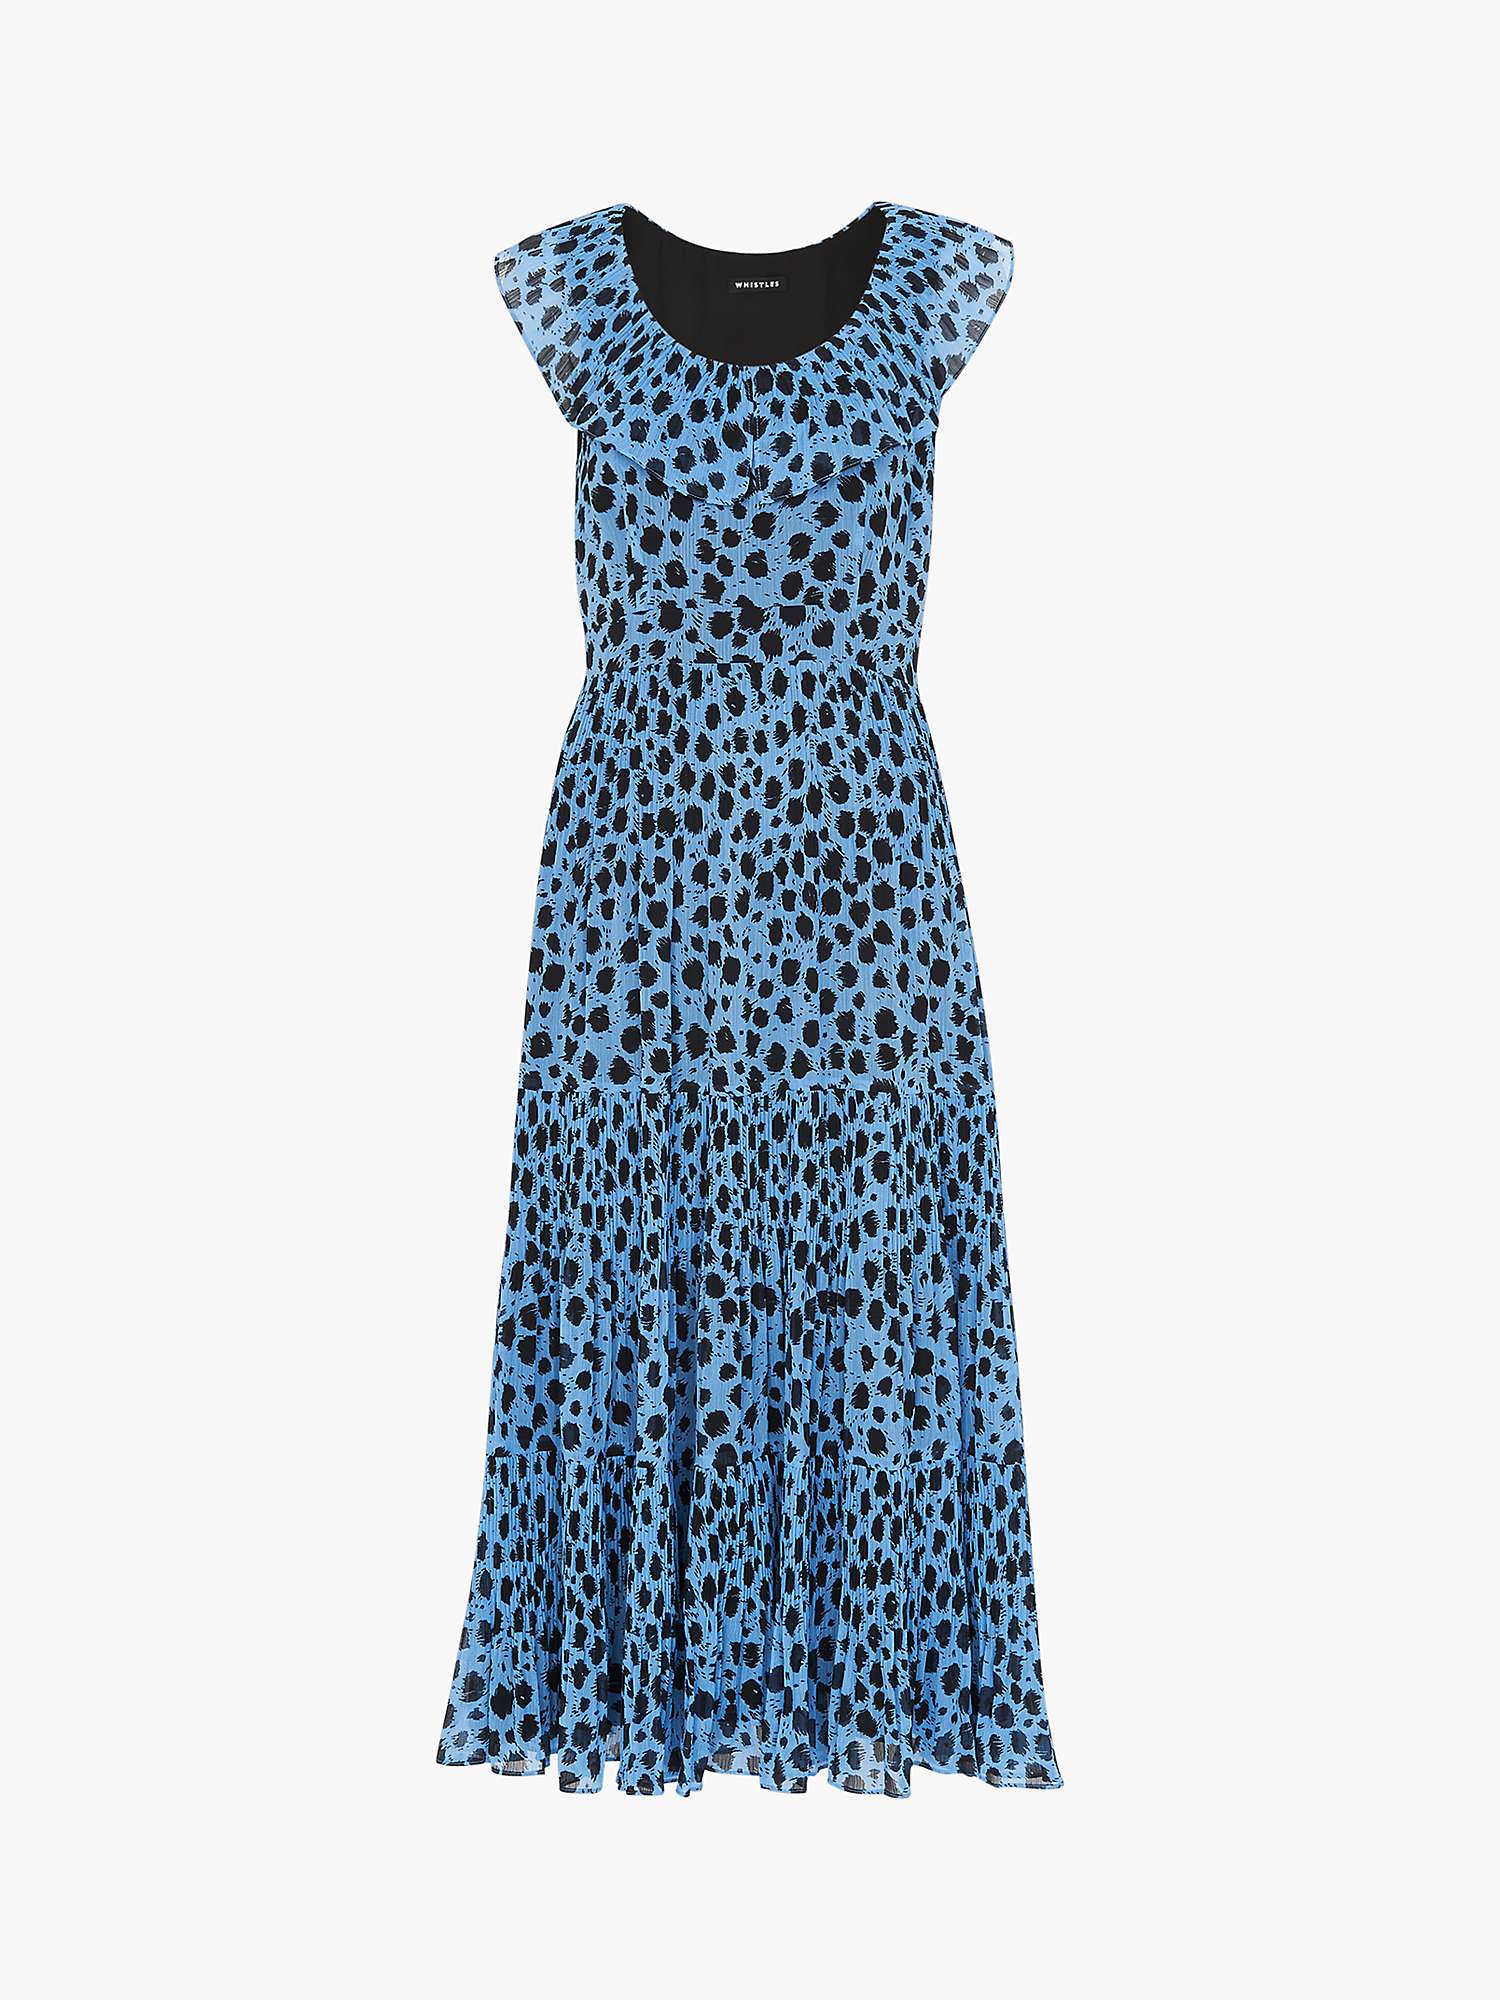 Buy Whistles Brushed Dalmation Print Tiered Midi Dress, Blue/Multi Online at johnlewis.com